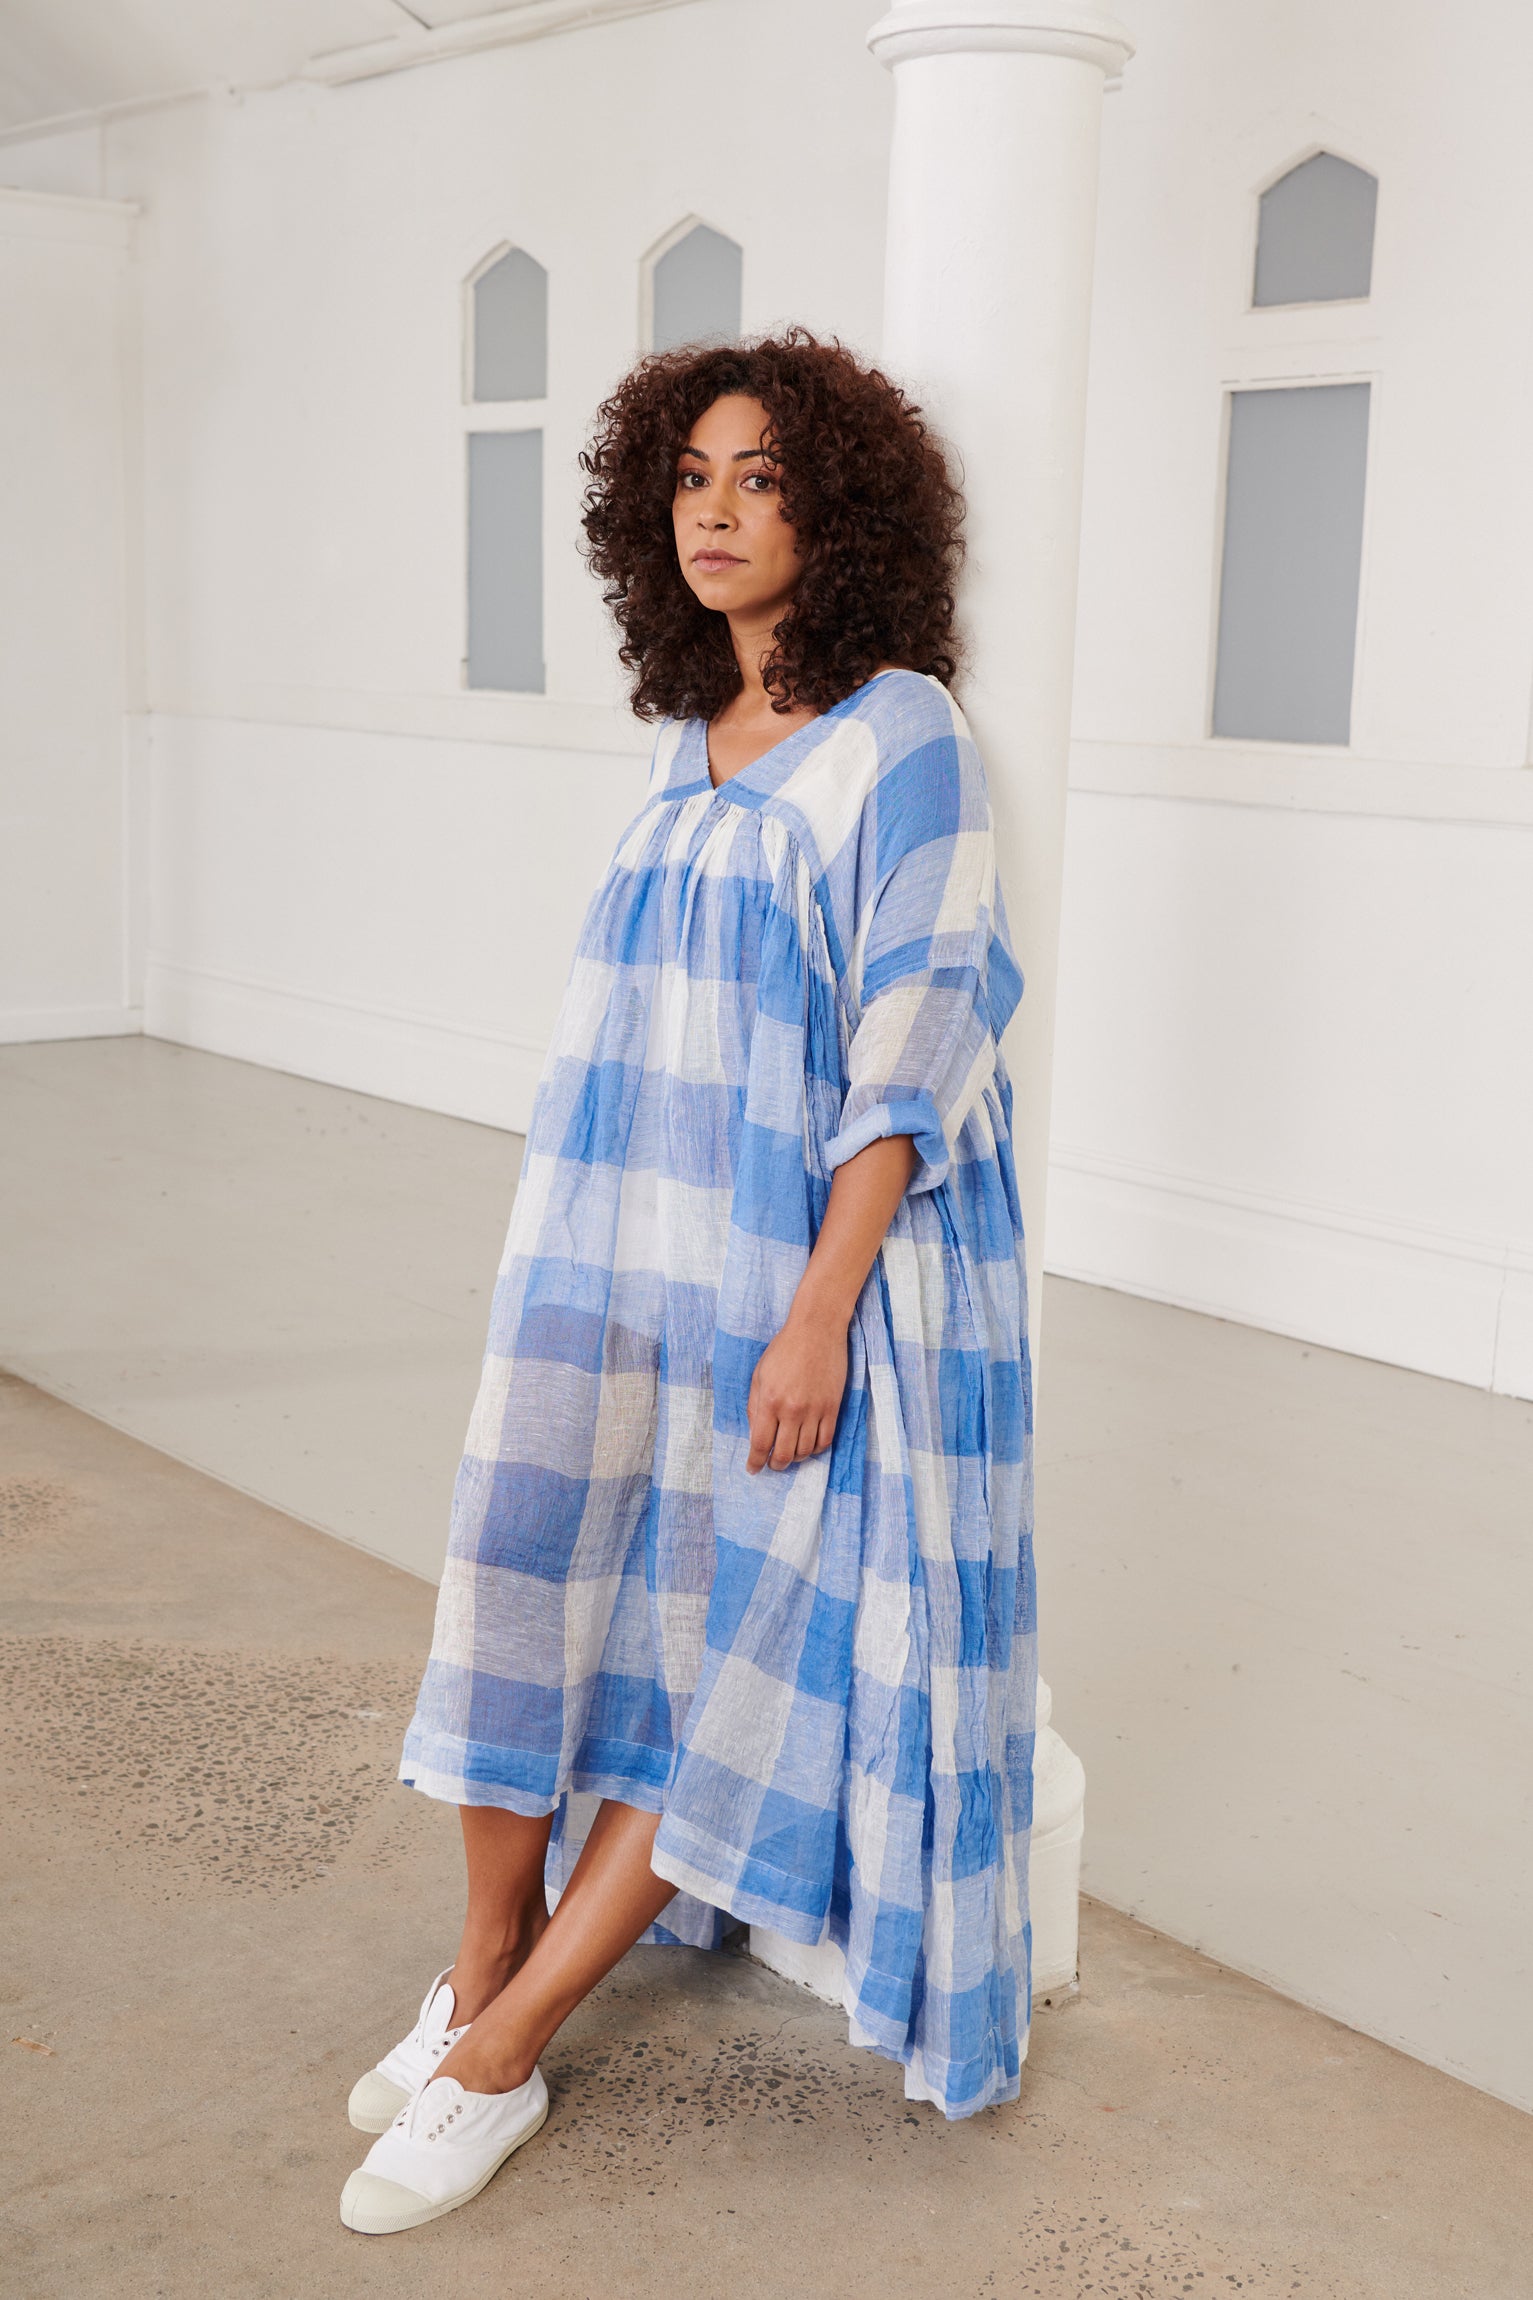 A MegbyDesign model is wearing a blue and white gingham soft gauze linen tunic dress 